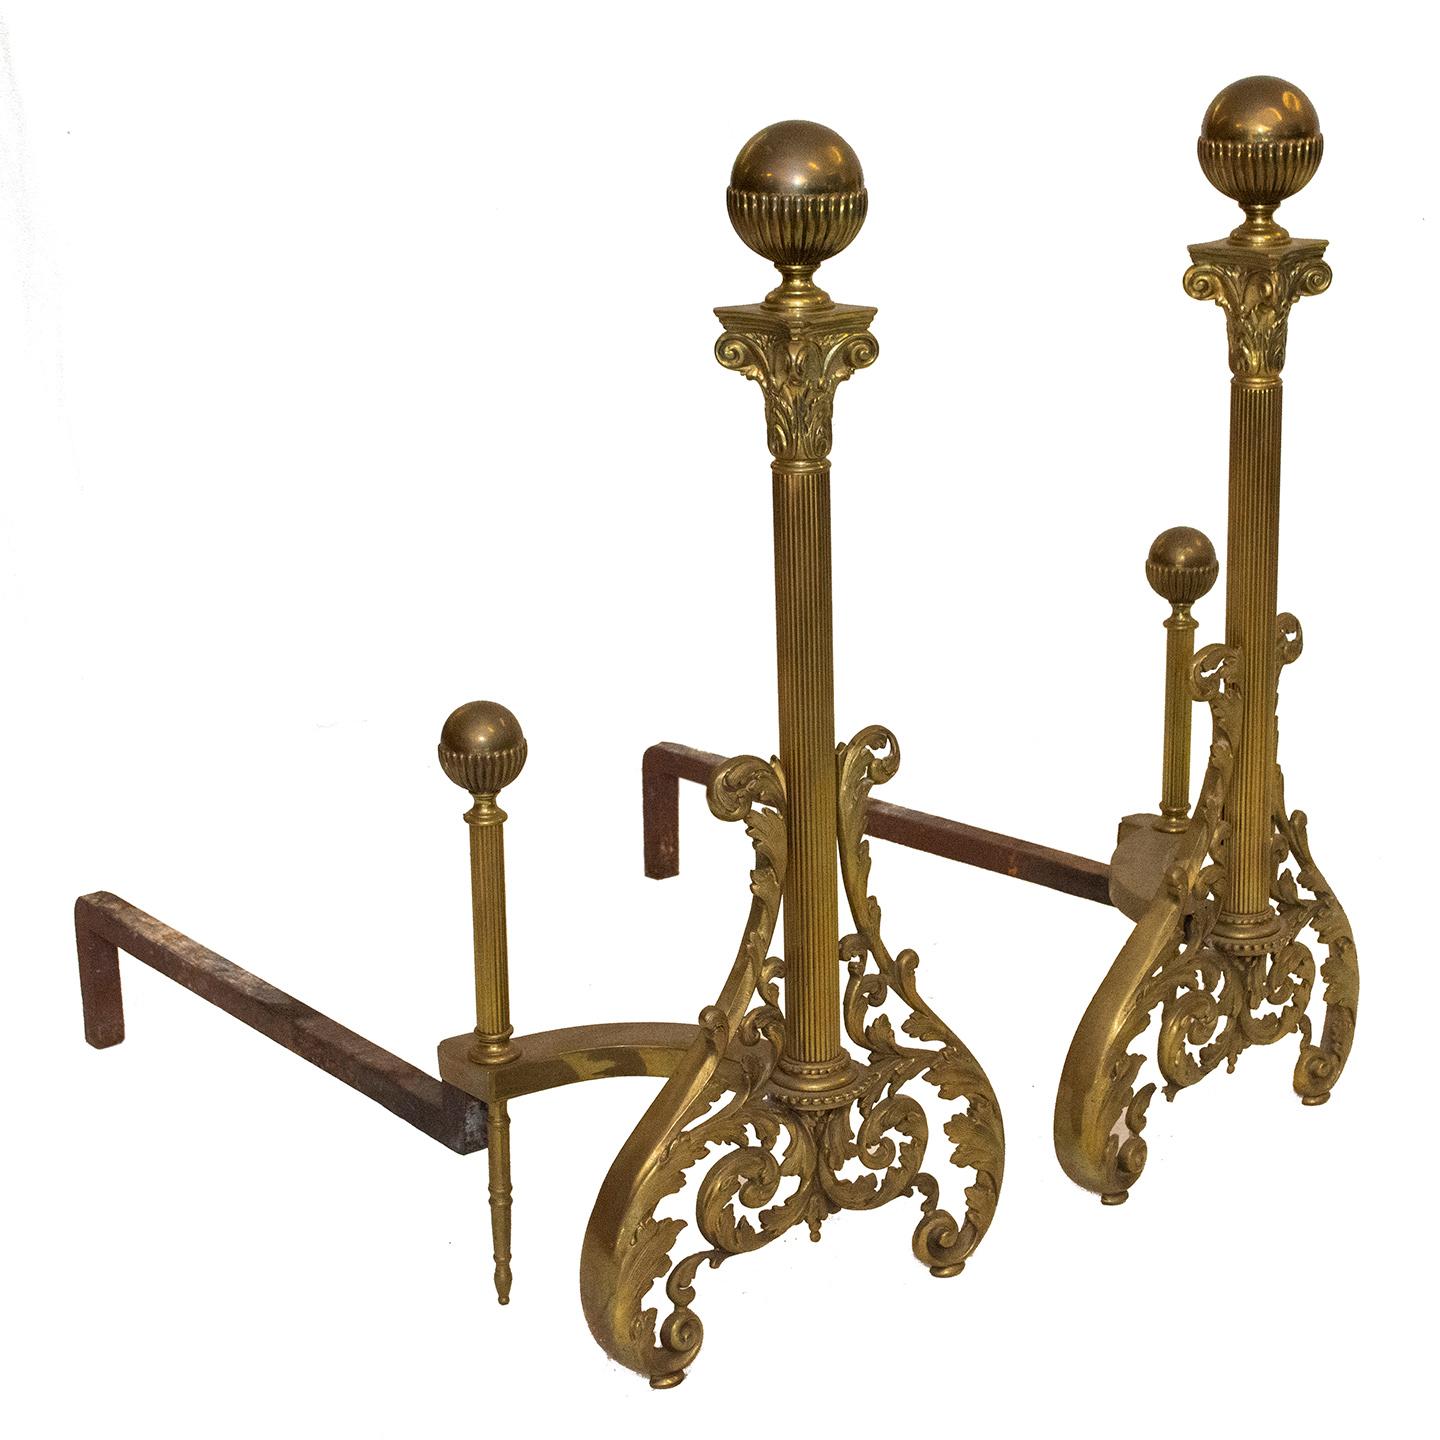 These vintage andirons of brass and iron are an attractive pair. The Neoclassical- inspired decorative features include; Corinthian capitals, acanthus leaves, scroll-work, reeded columns, and sphere balls.